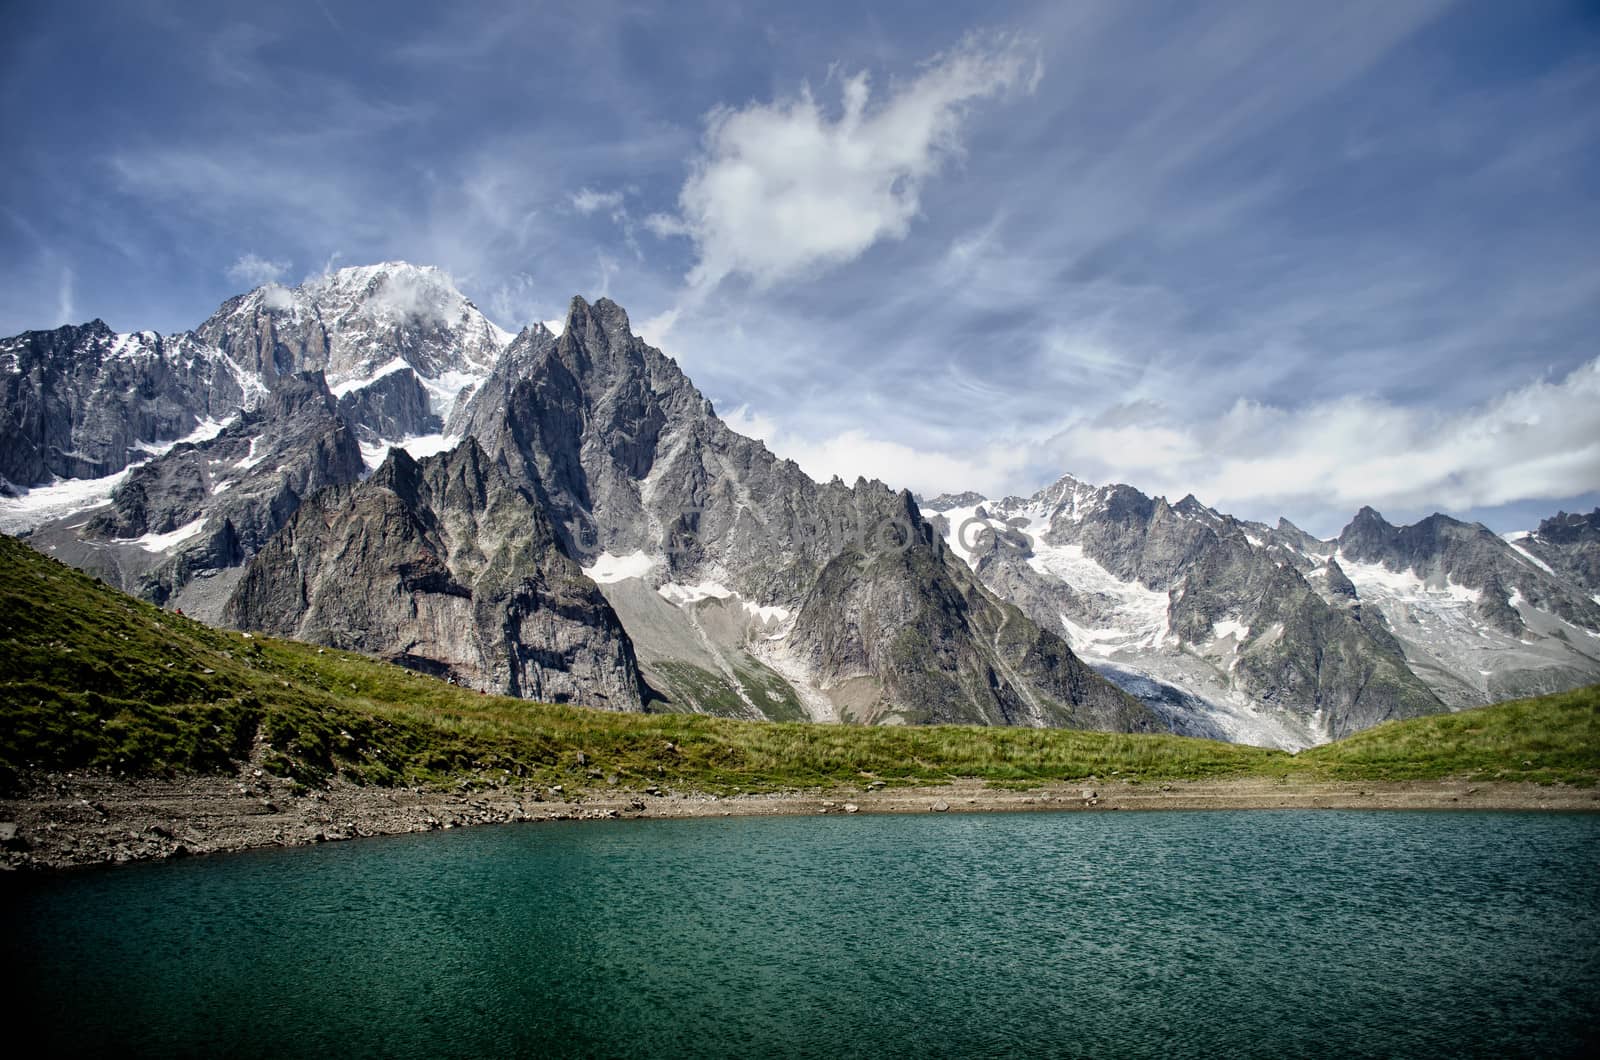 Small alpine lake and mountains in the Italian Alps